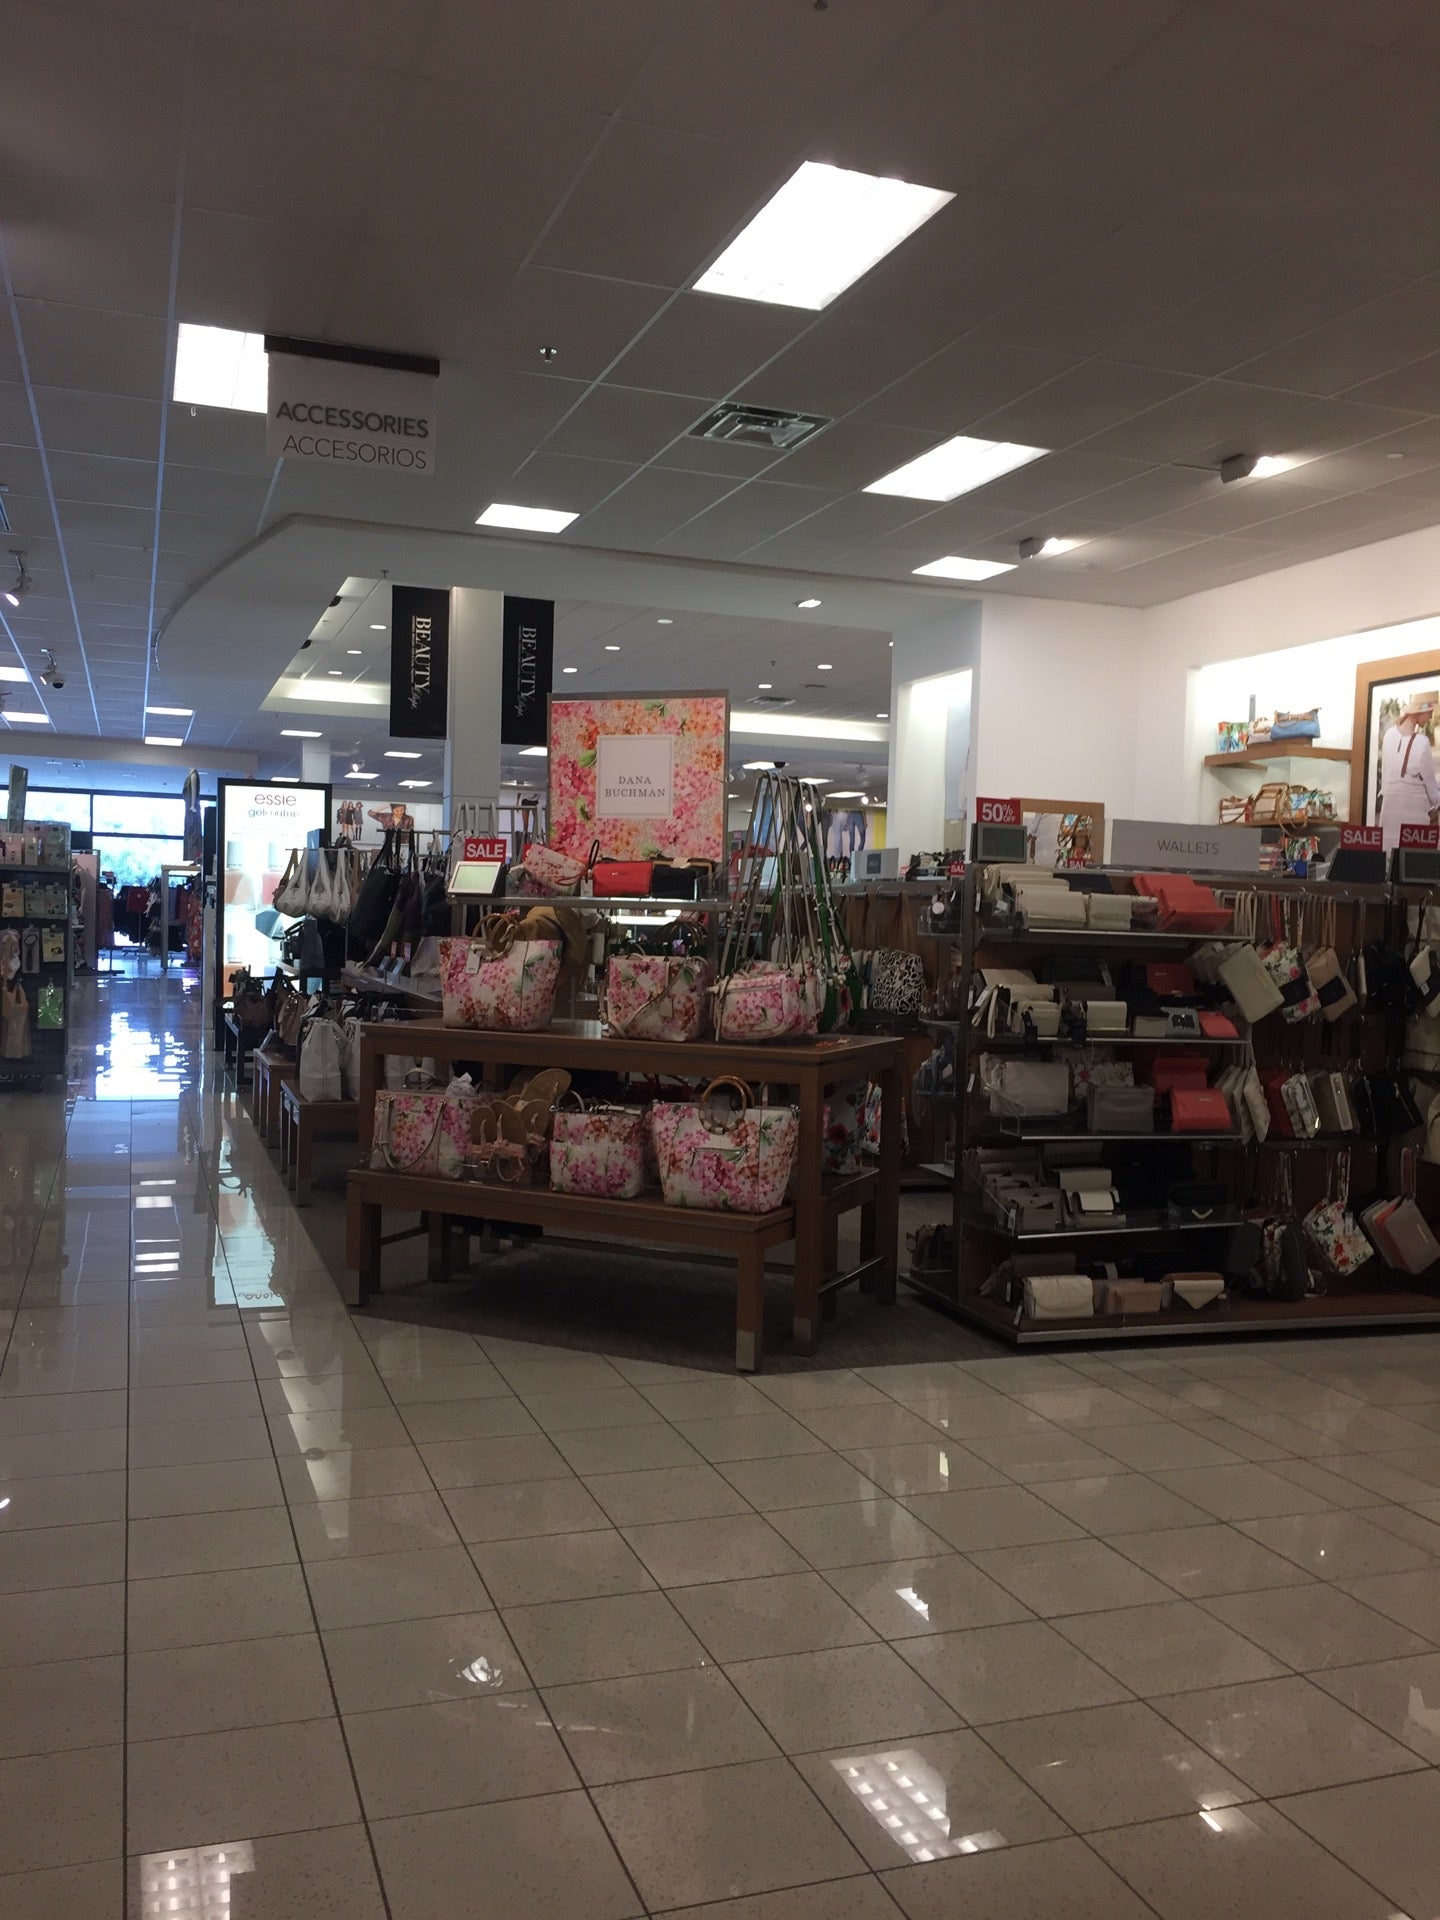 Kohl's, 2201 S Shore Ctr, Alameda, CA, Clothing Retail - MapQuest